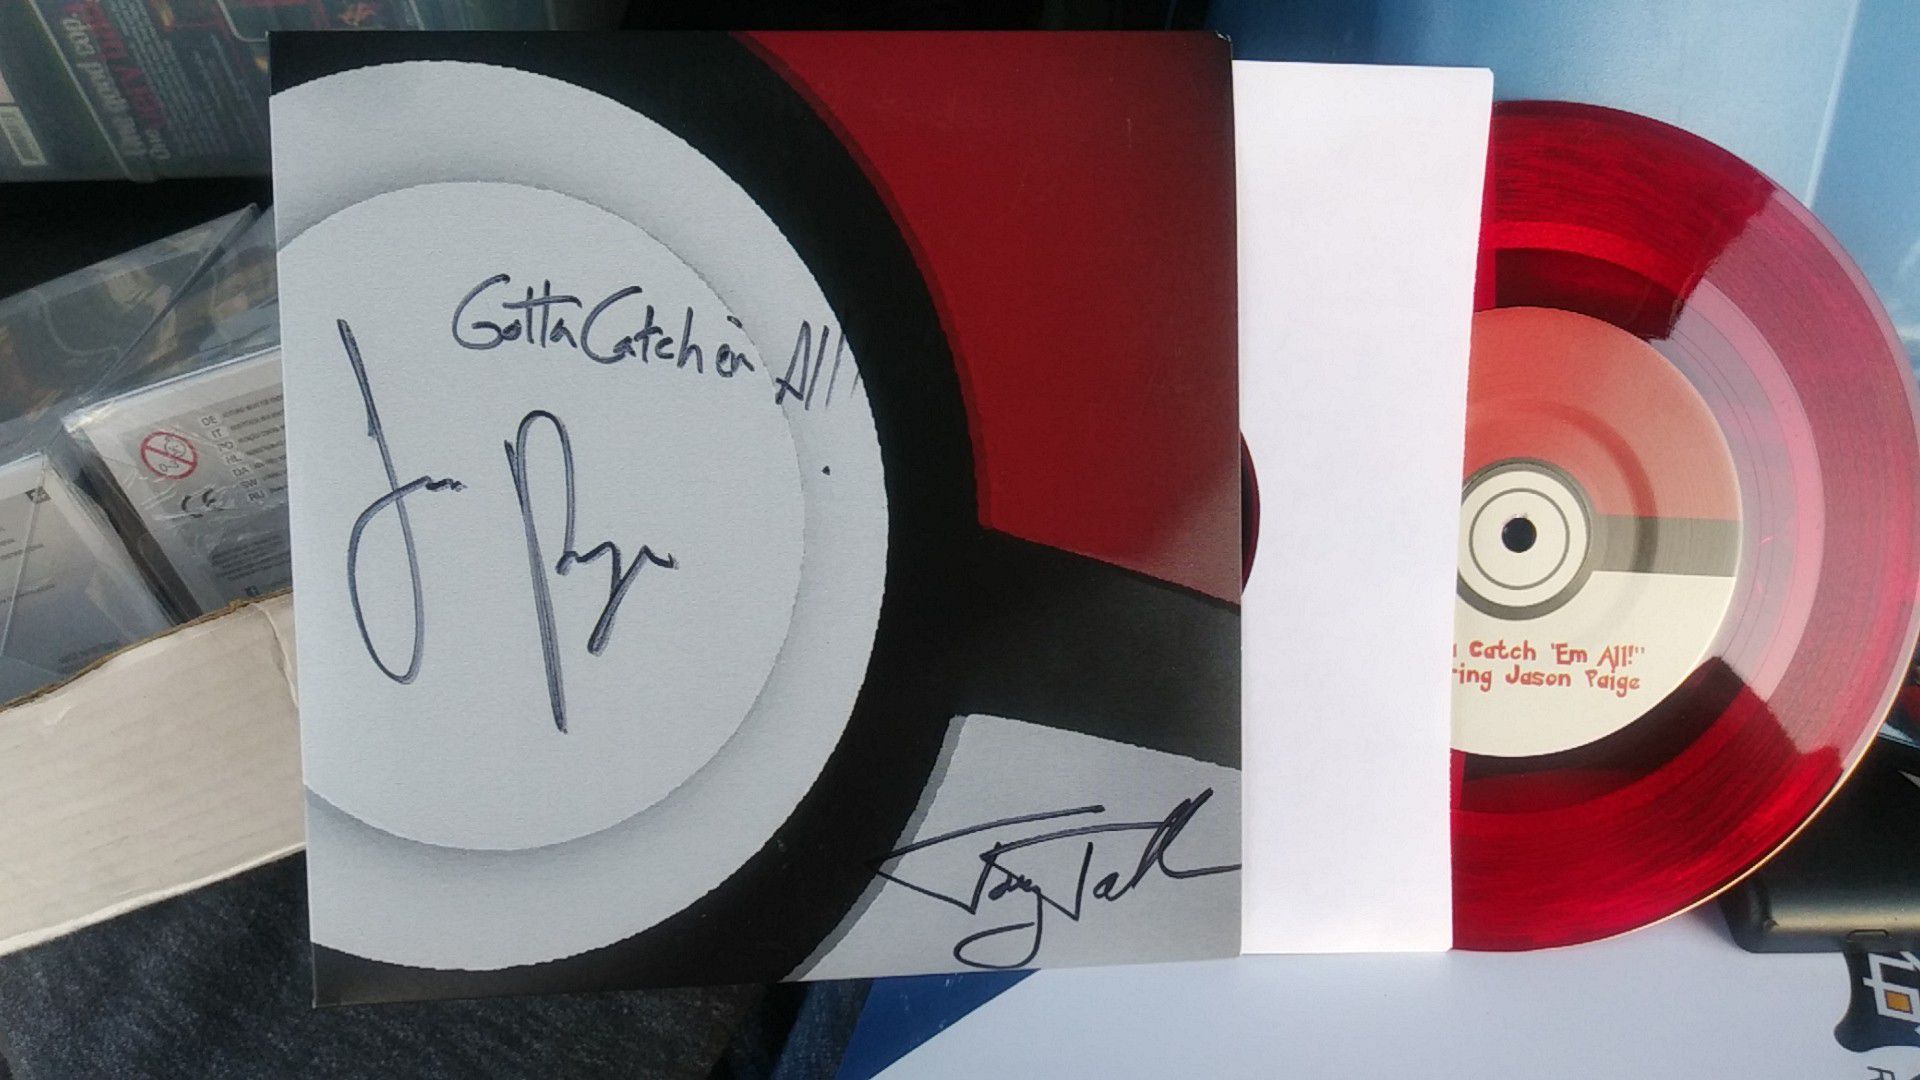 Ideel galop overdraw Pokemon Theme Vinyl Record Signed by theme artist Jason Paige for Sale in  National City, CA - OfferUp